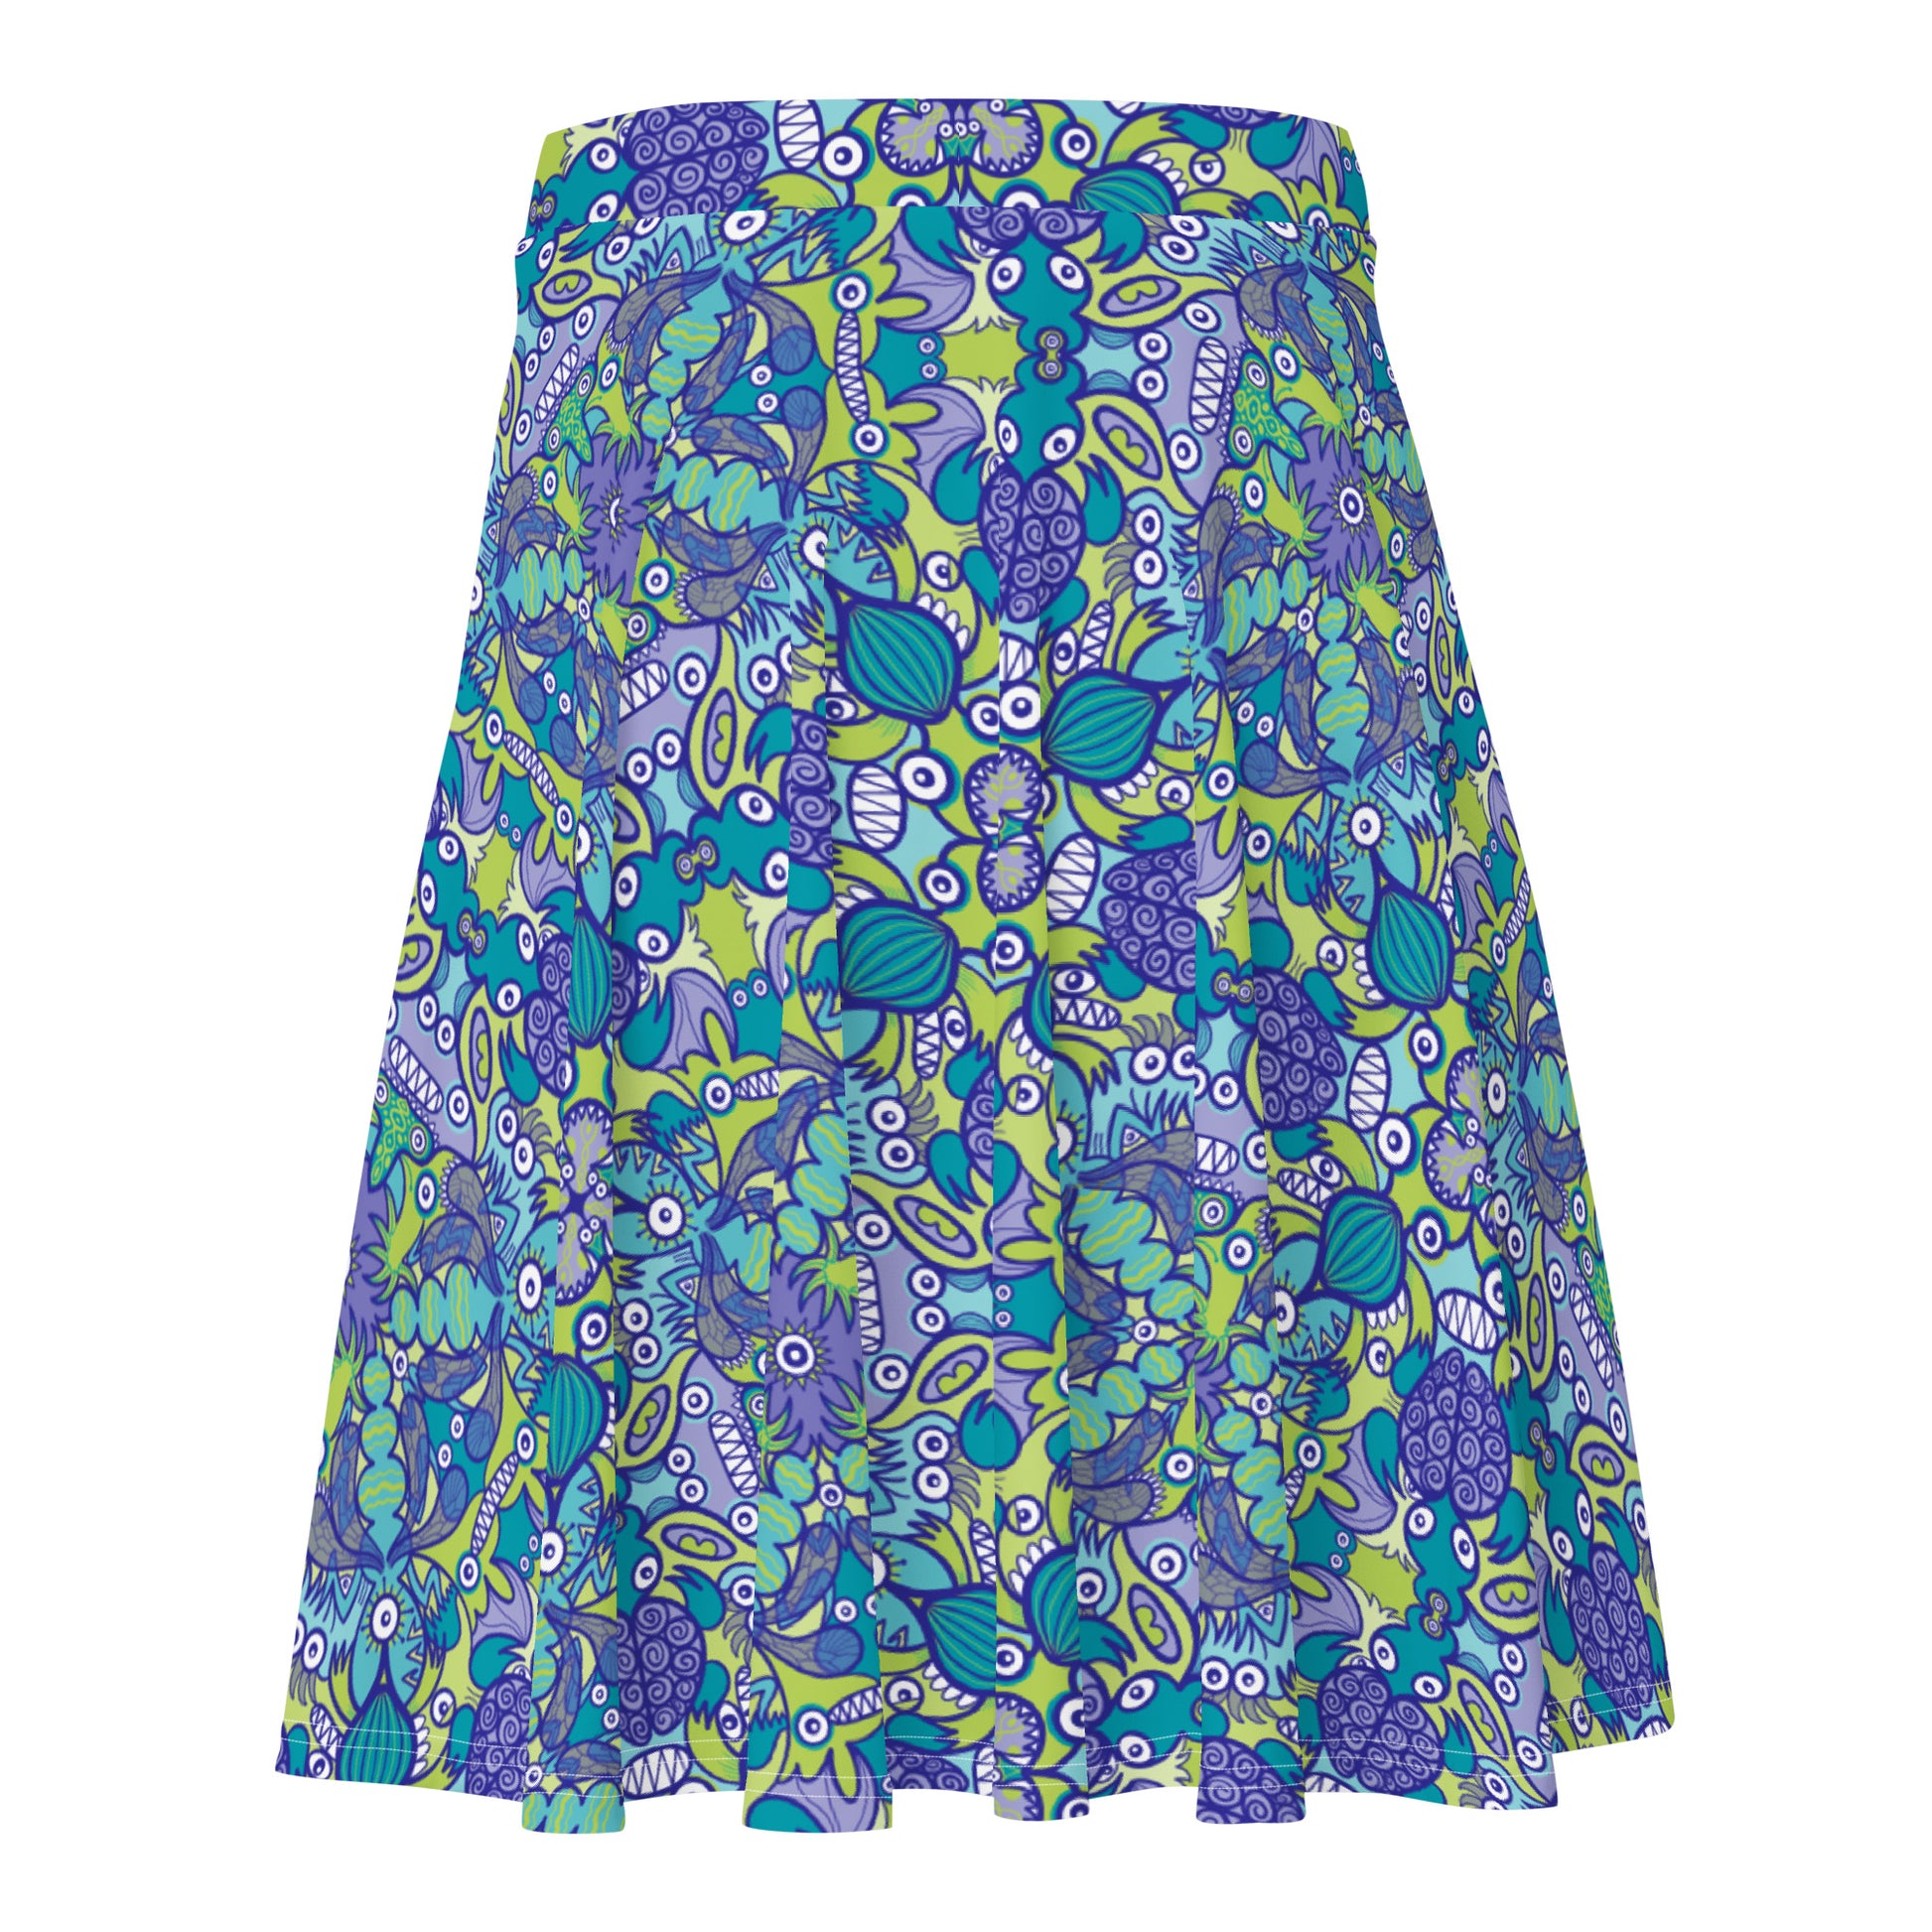 Once upon a time in an ocean full of life - Skater Skirt. Product detail